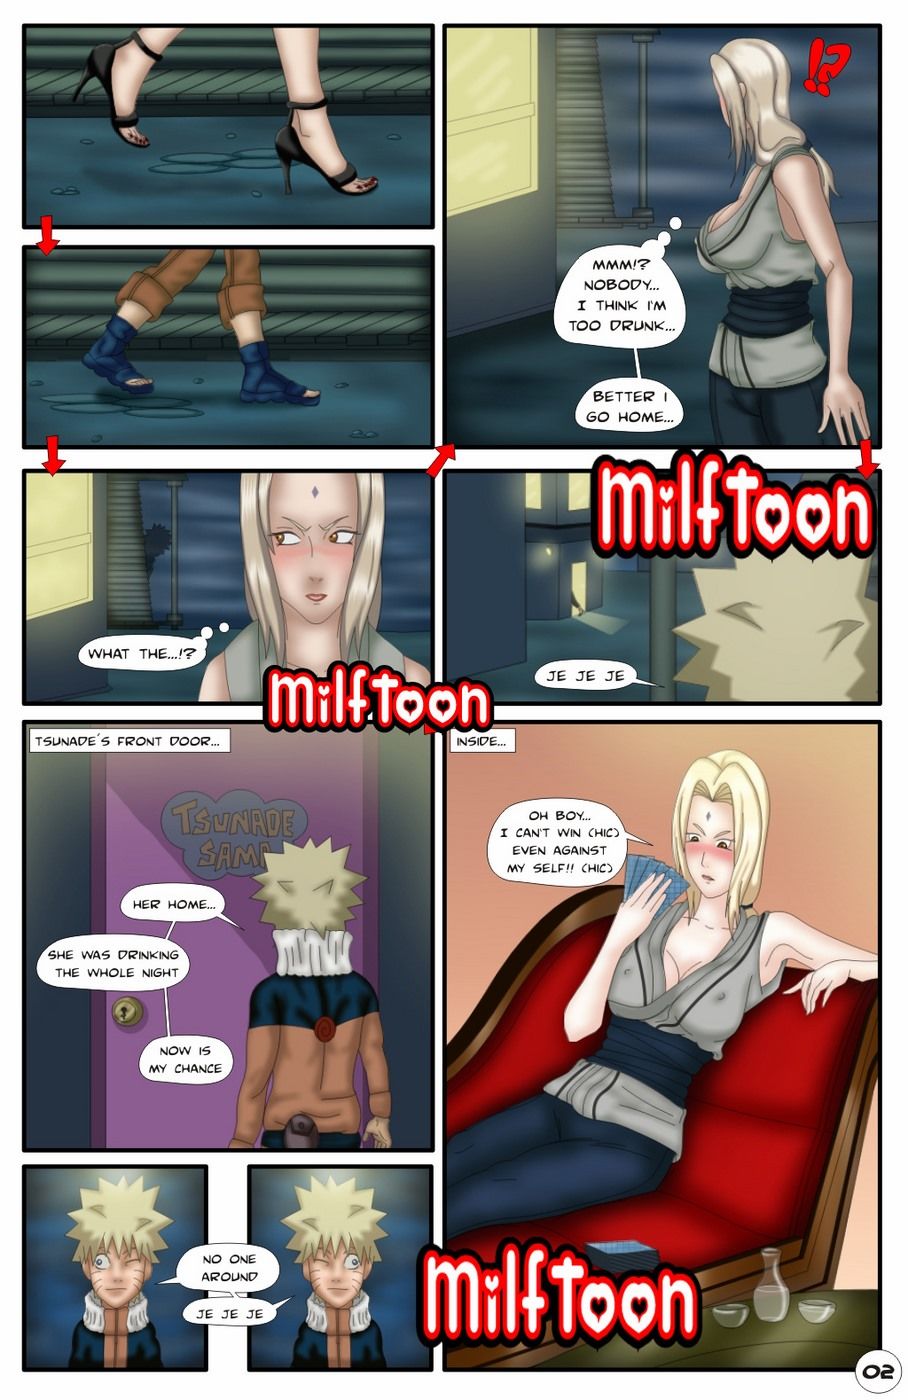 milftoon Naruto page 1